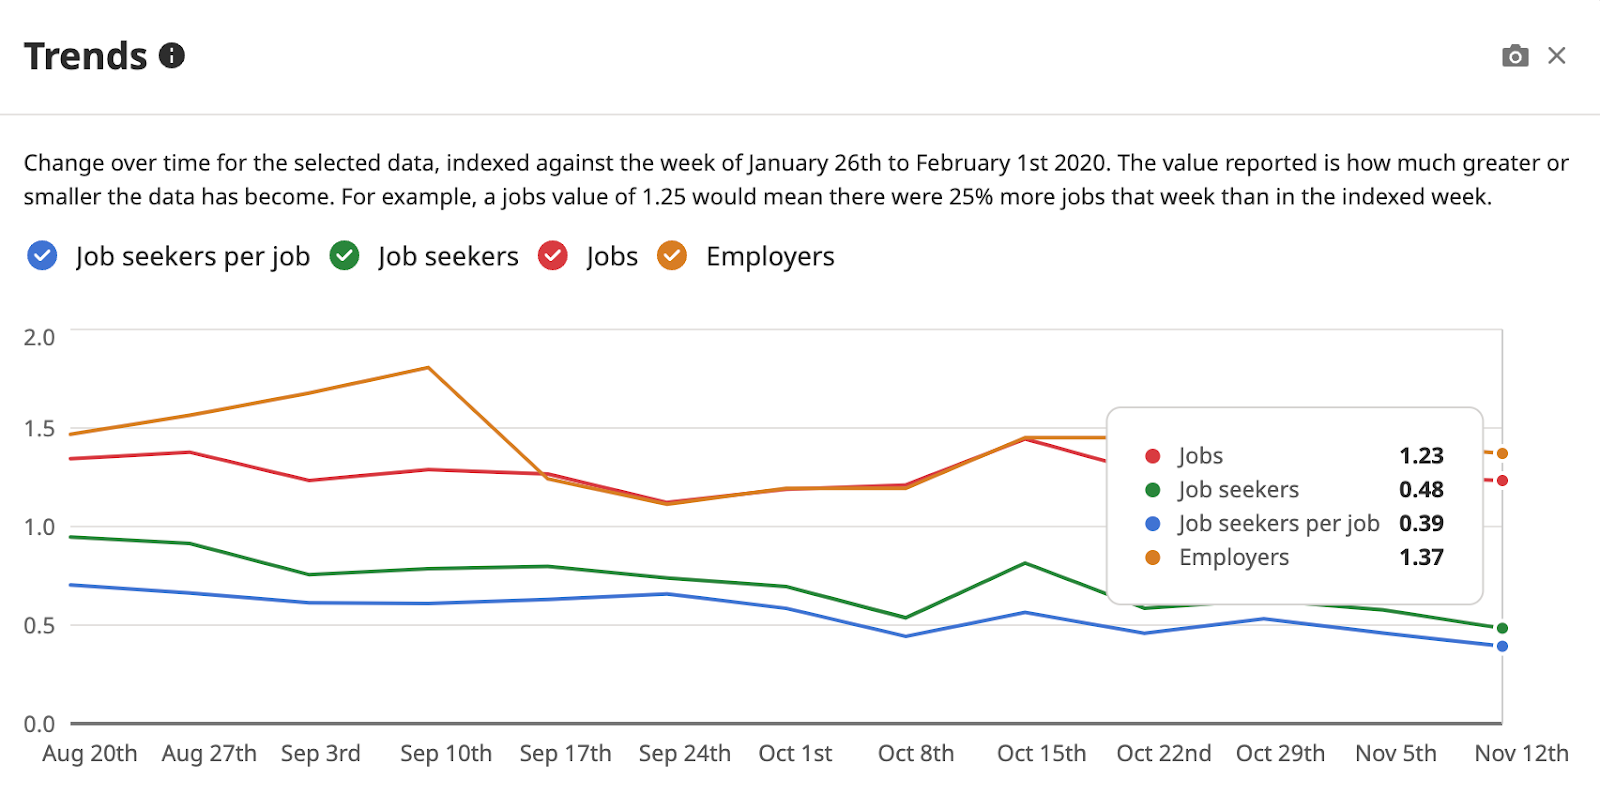 Indeed’s Hiring Insights gives employers the data to review labor statistics across the U.S., including the number of job seekers over a set period of time.